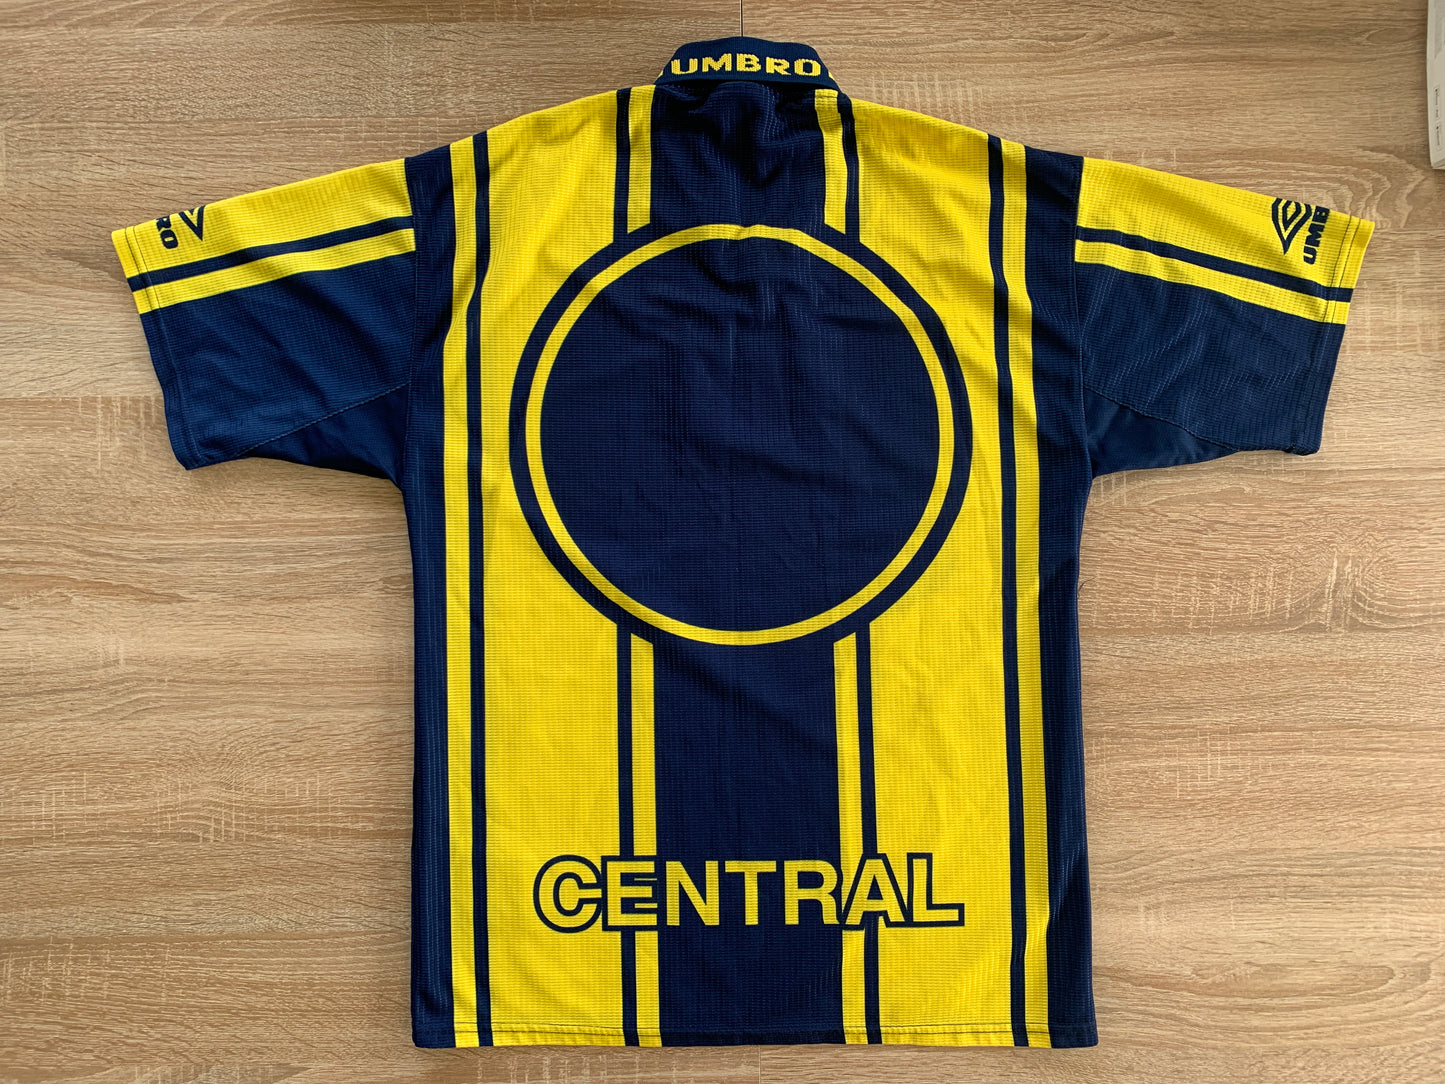 Rosario Central Home Shirt from 1998-1999: A classic representation of Rosario Central's home jersey during the 1998-1999 season. Featuring the club's emblem, it symbolizes the team's tradition and spirit on the field during that specific period.